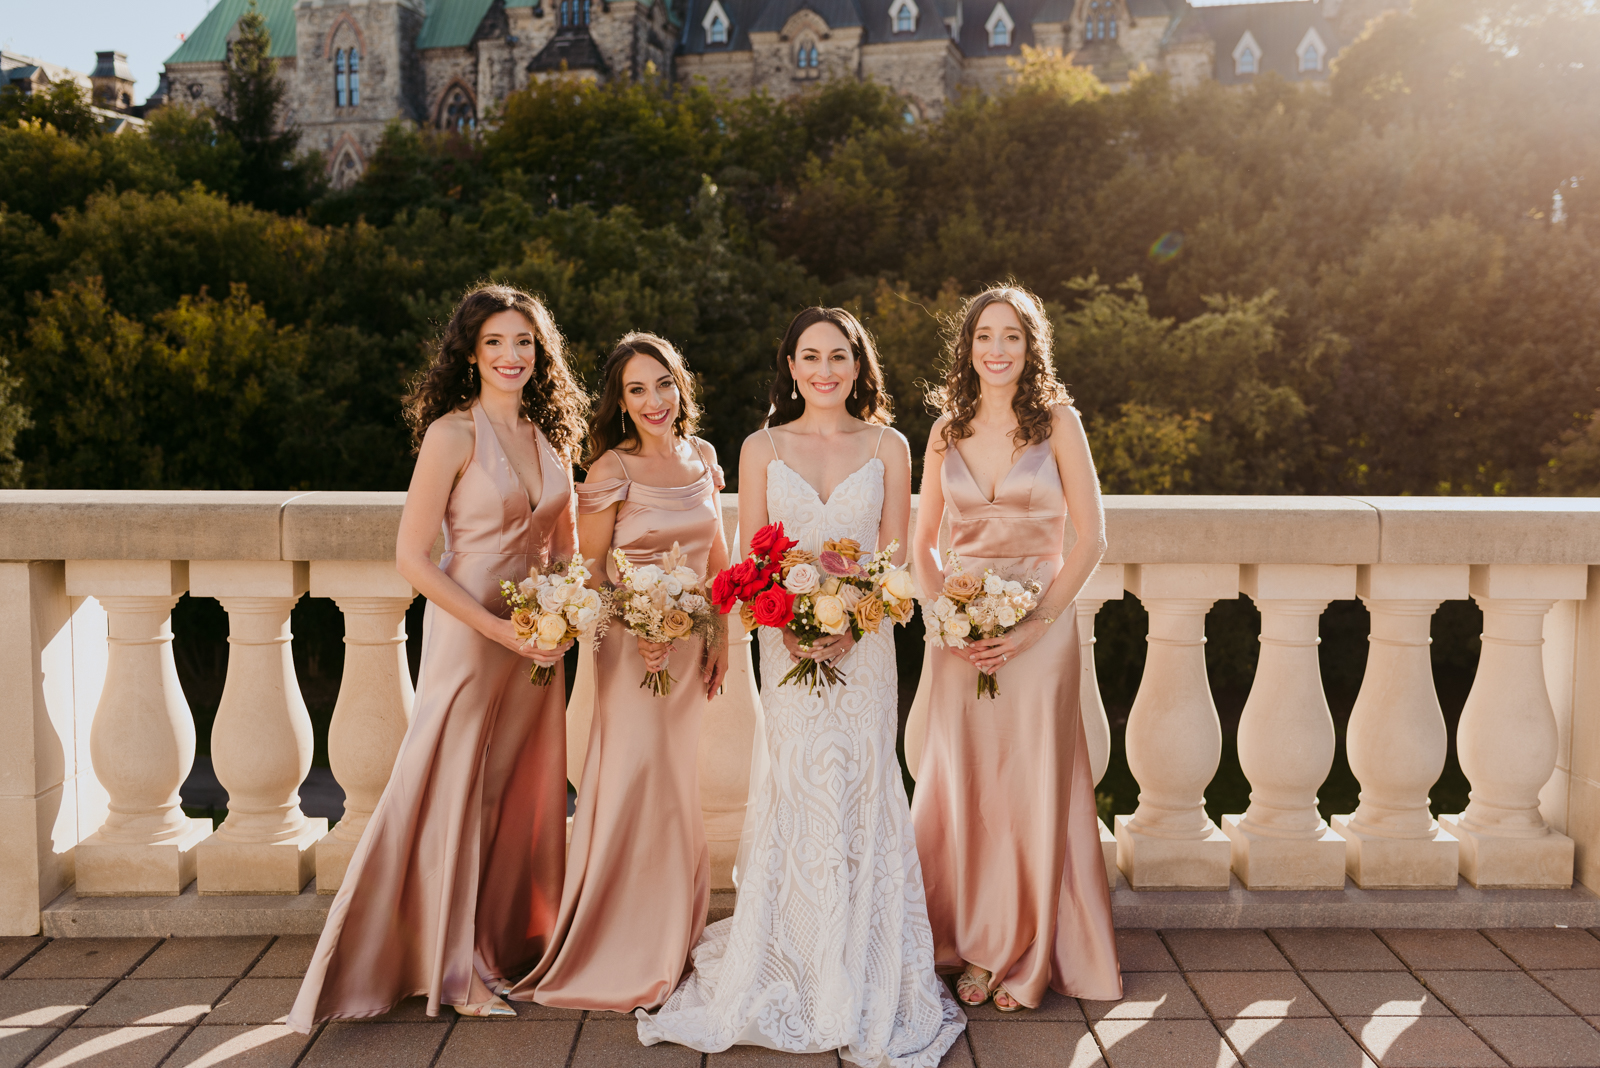 bride and bridesmaids on the terrace of the chateau laurier with parliament buildings in the background